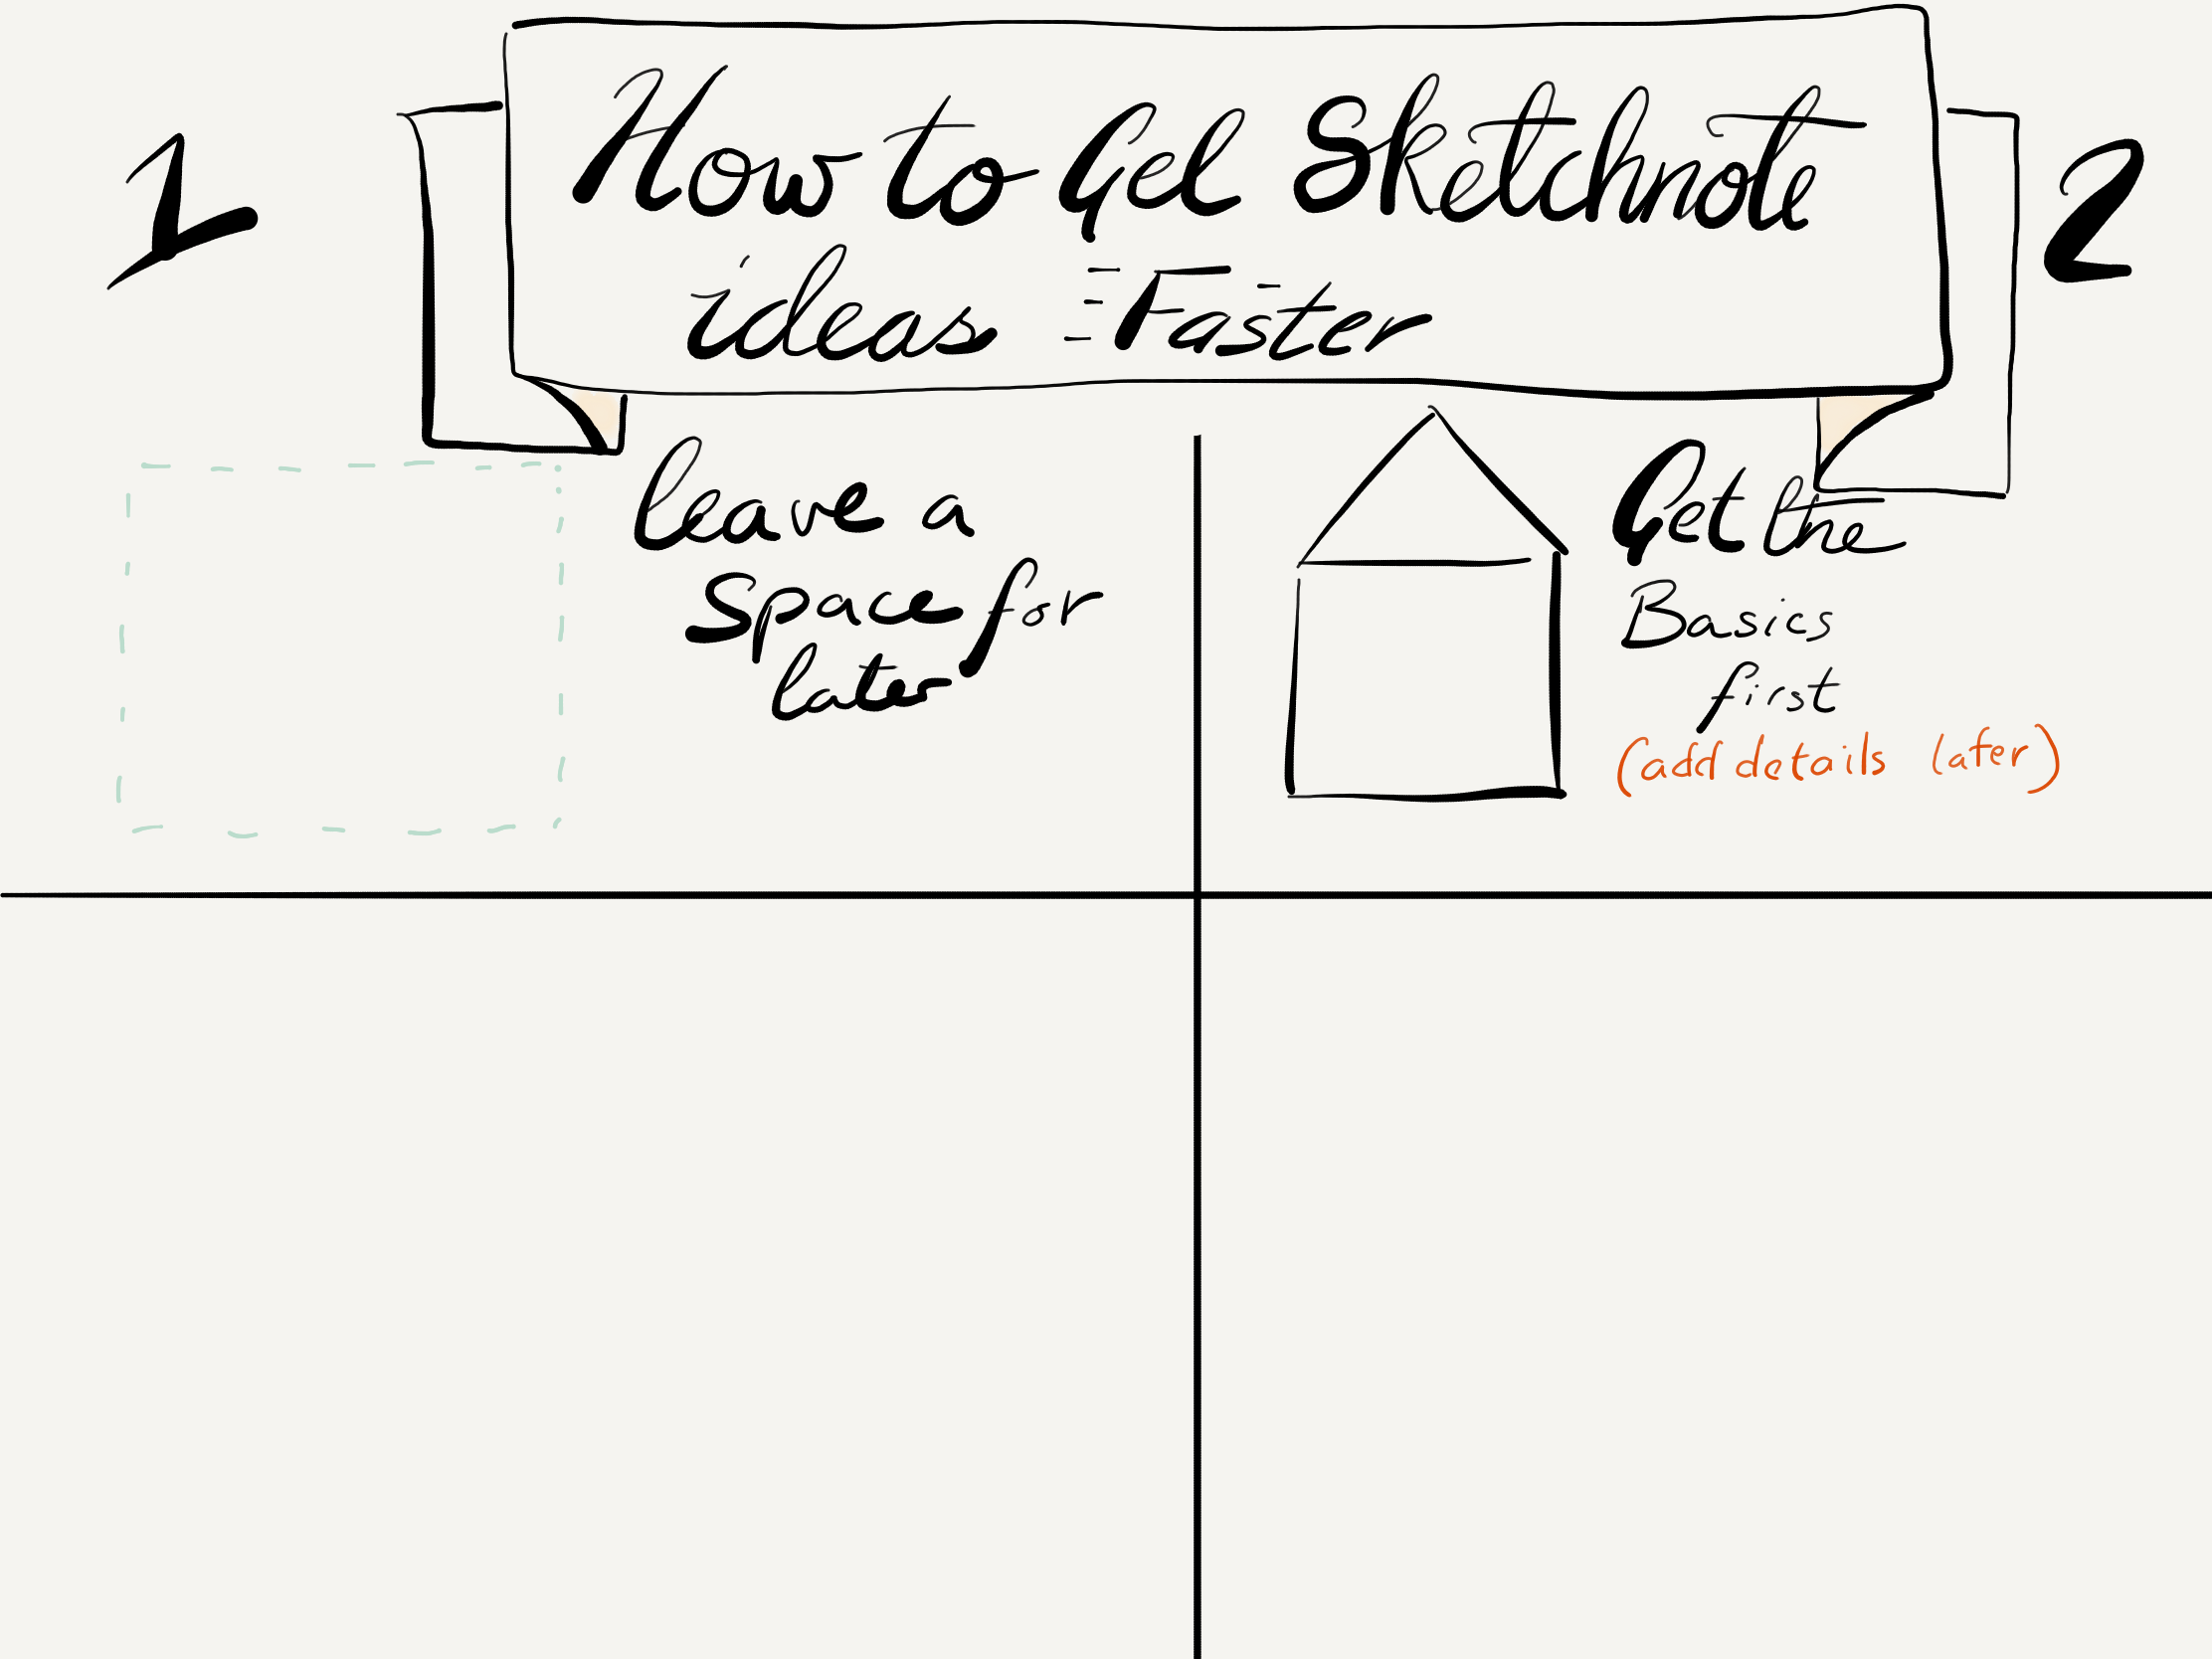 4 Ways How To Get Sketchnote Ideas Faster get the basics first